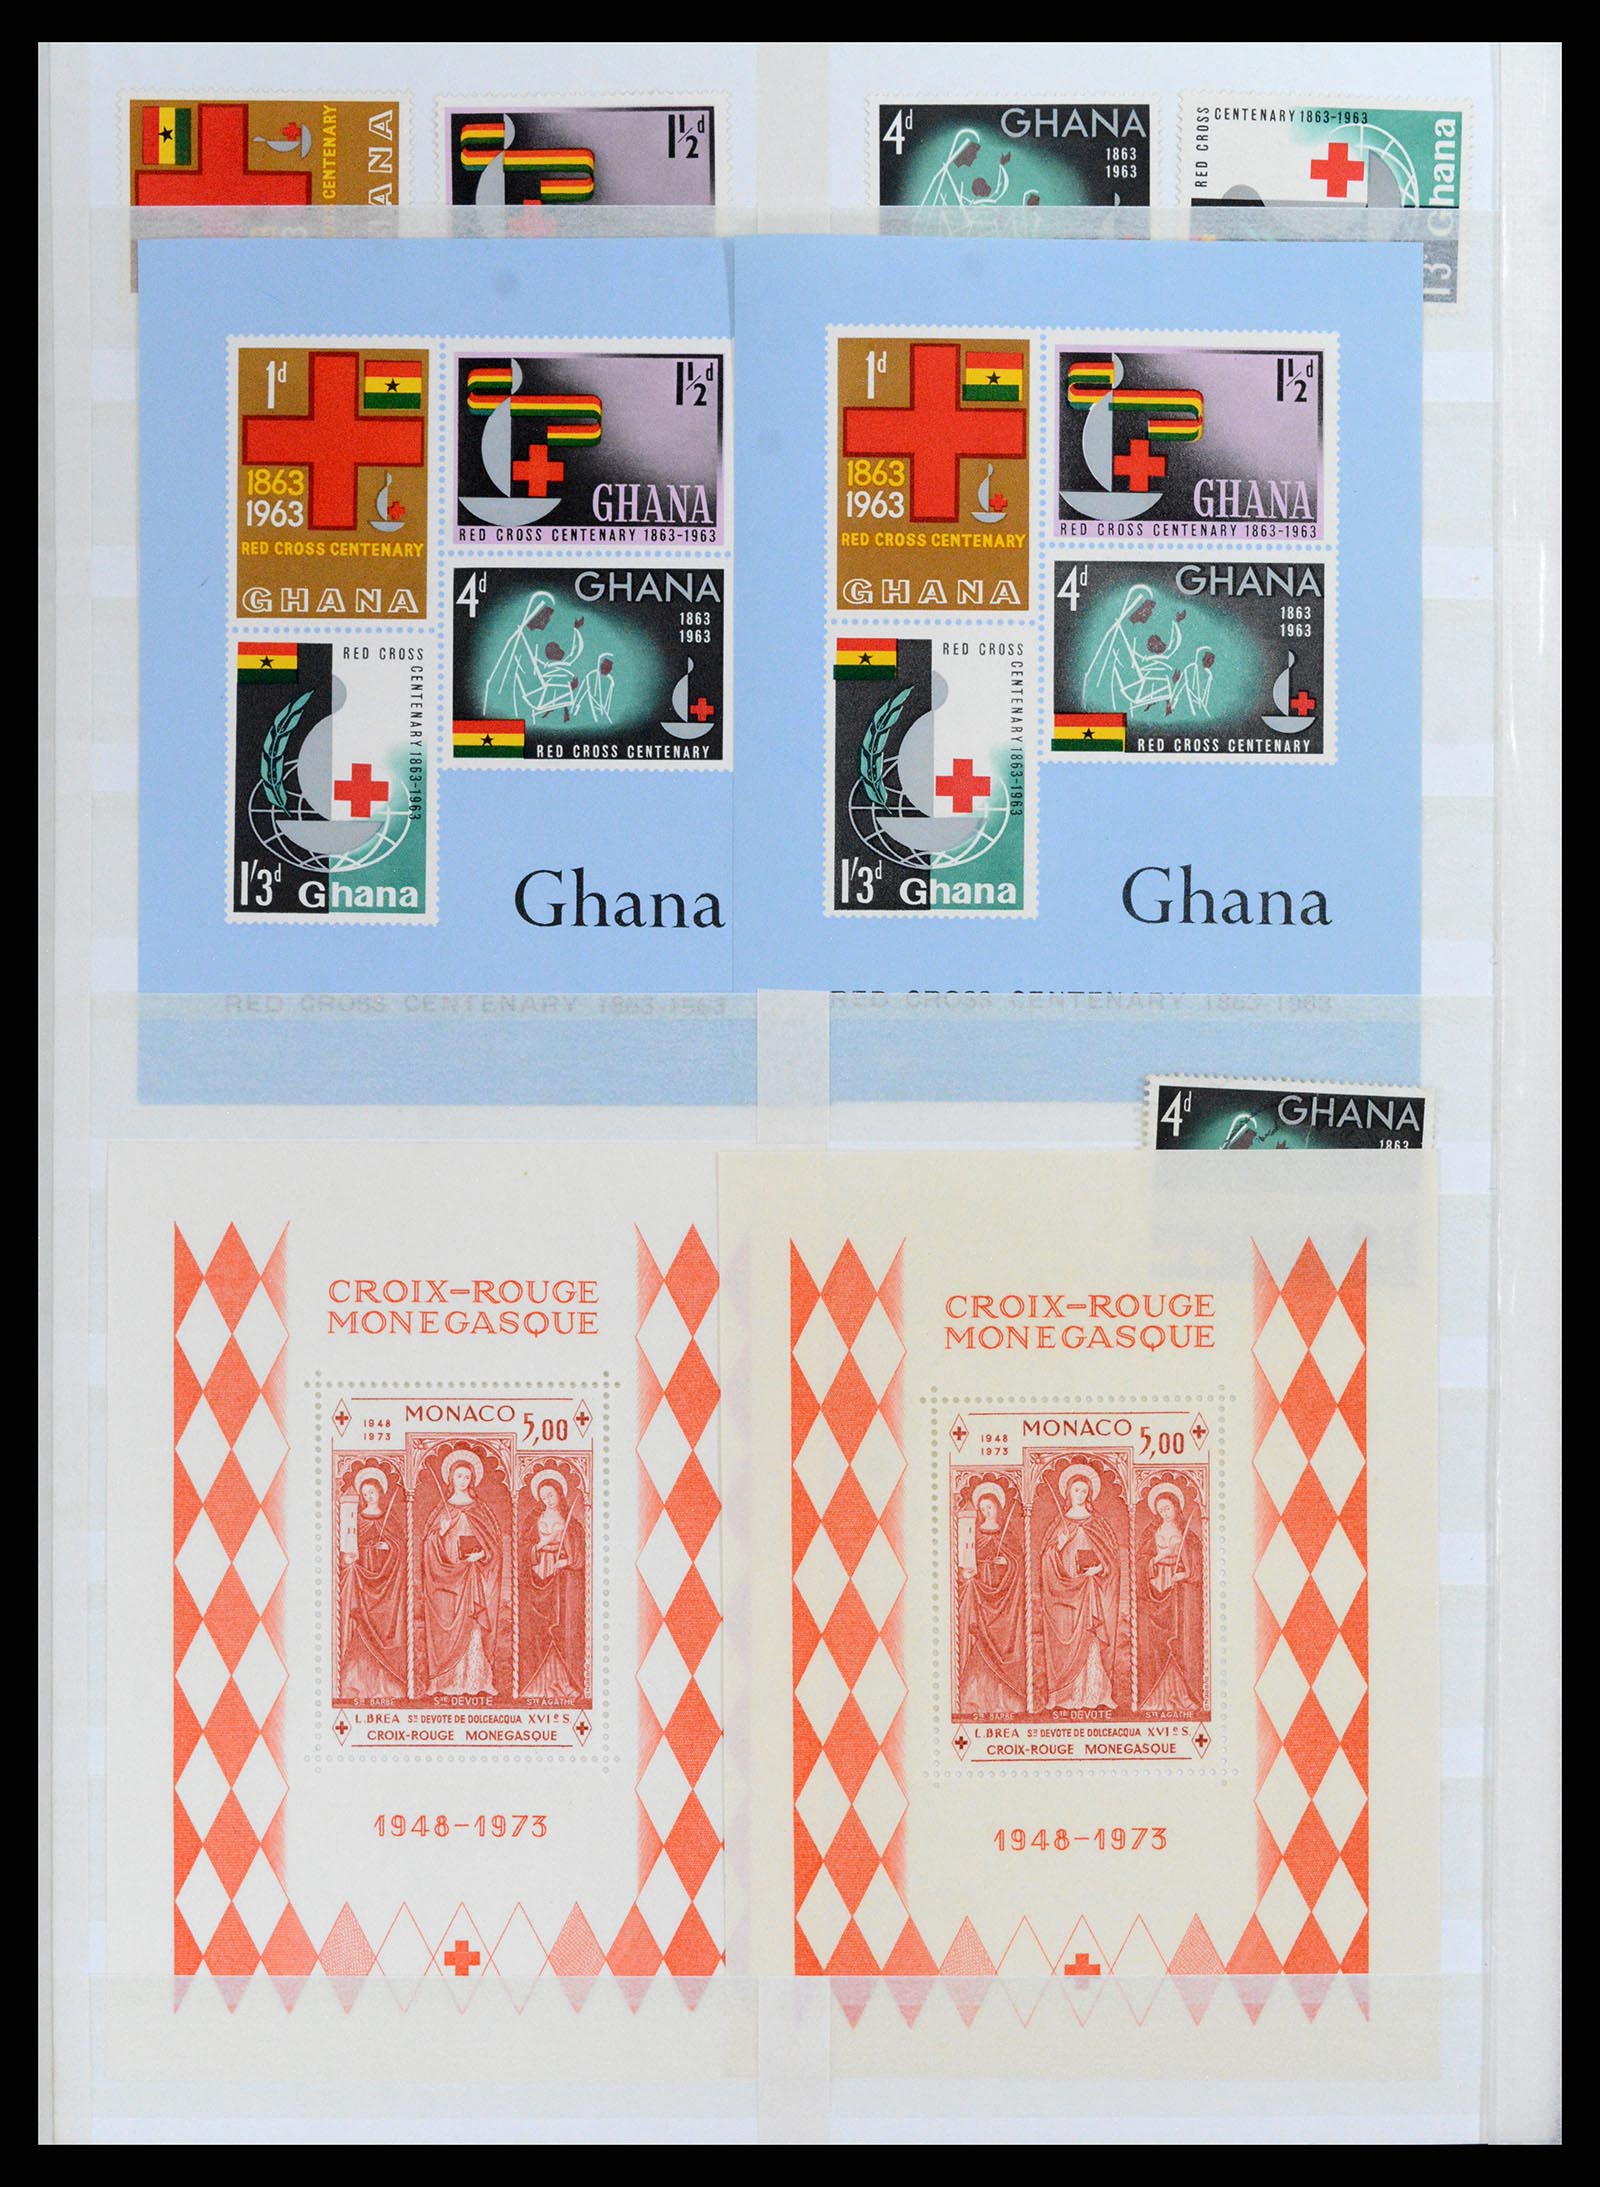 37885 025 - Stamp Collection 37885 Theme Red Cross 1906-2000.